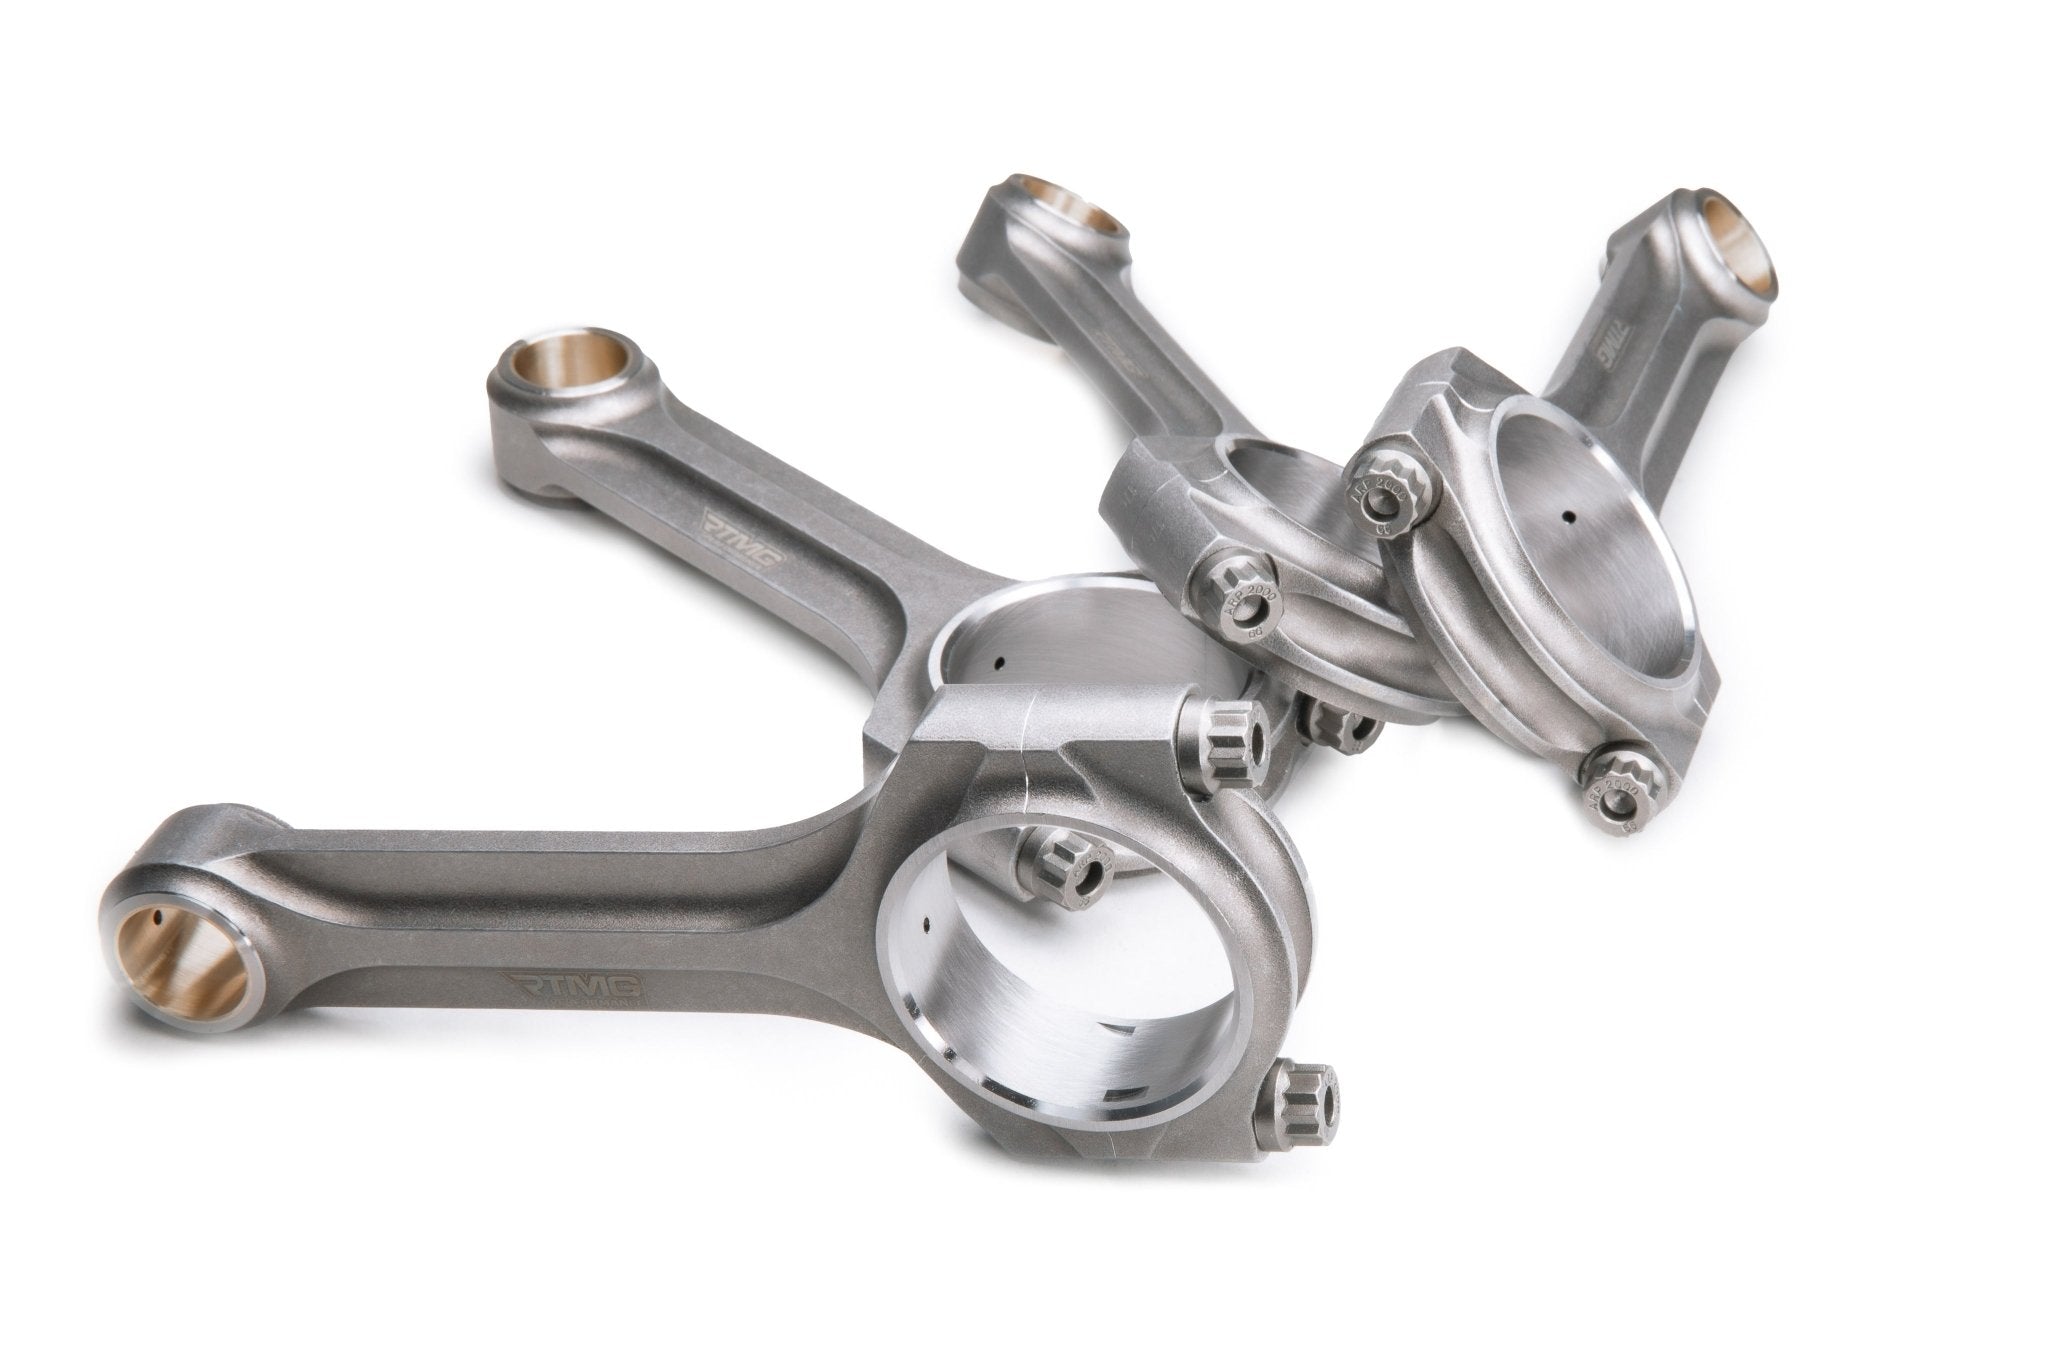 Connecting Rods Set X-Beam for 2.0 TFSI EA113 - Up to 1000HP+ - RTMG Performance